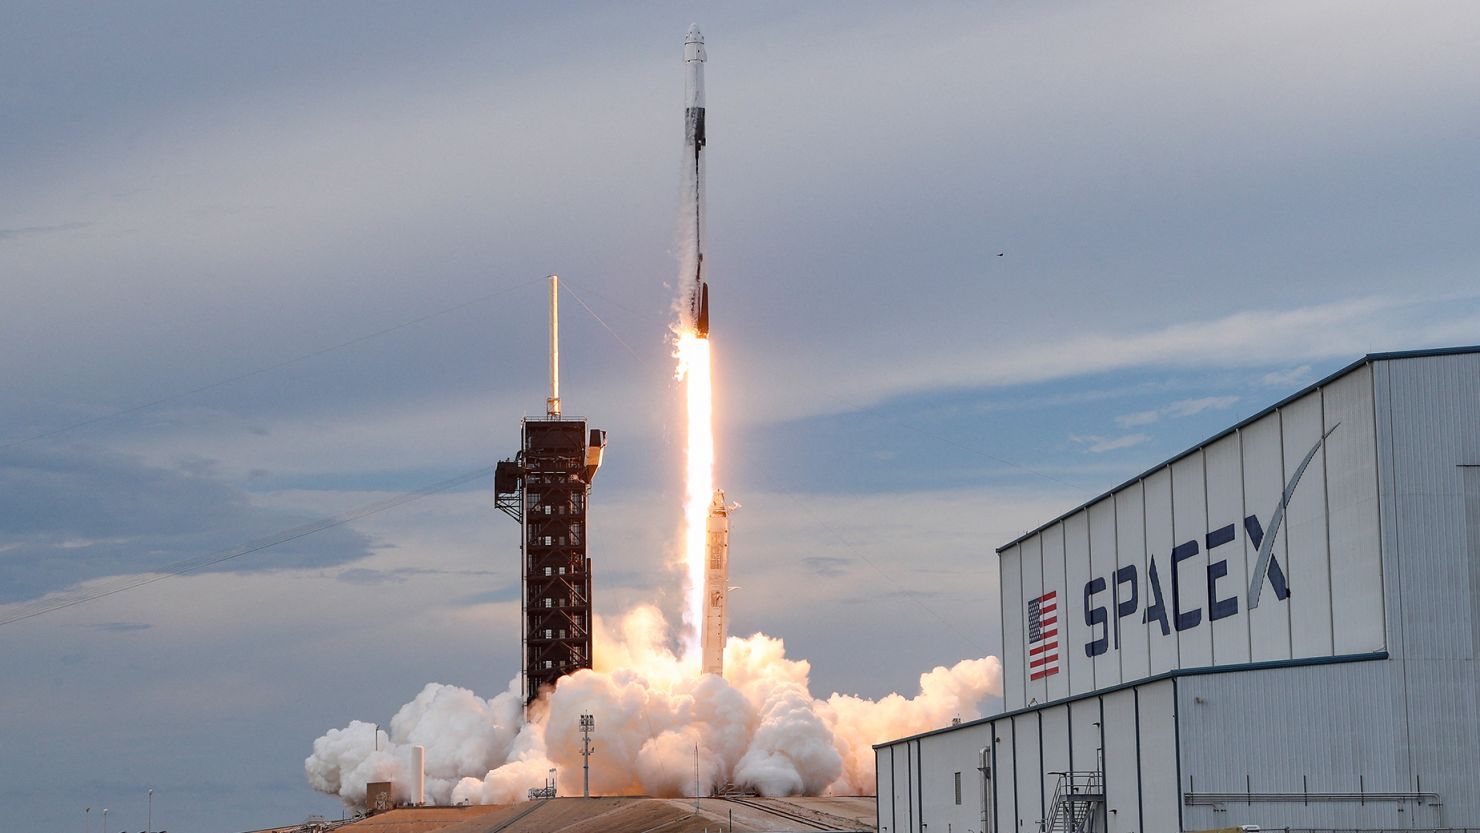 The Axiom-2 mission launches aboard a SpaceX Falcon 9 and Dragon capsule, carrying 4 crew members to the International Space Station from Kennedy Space Center, Florida on May 21, 2023.